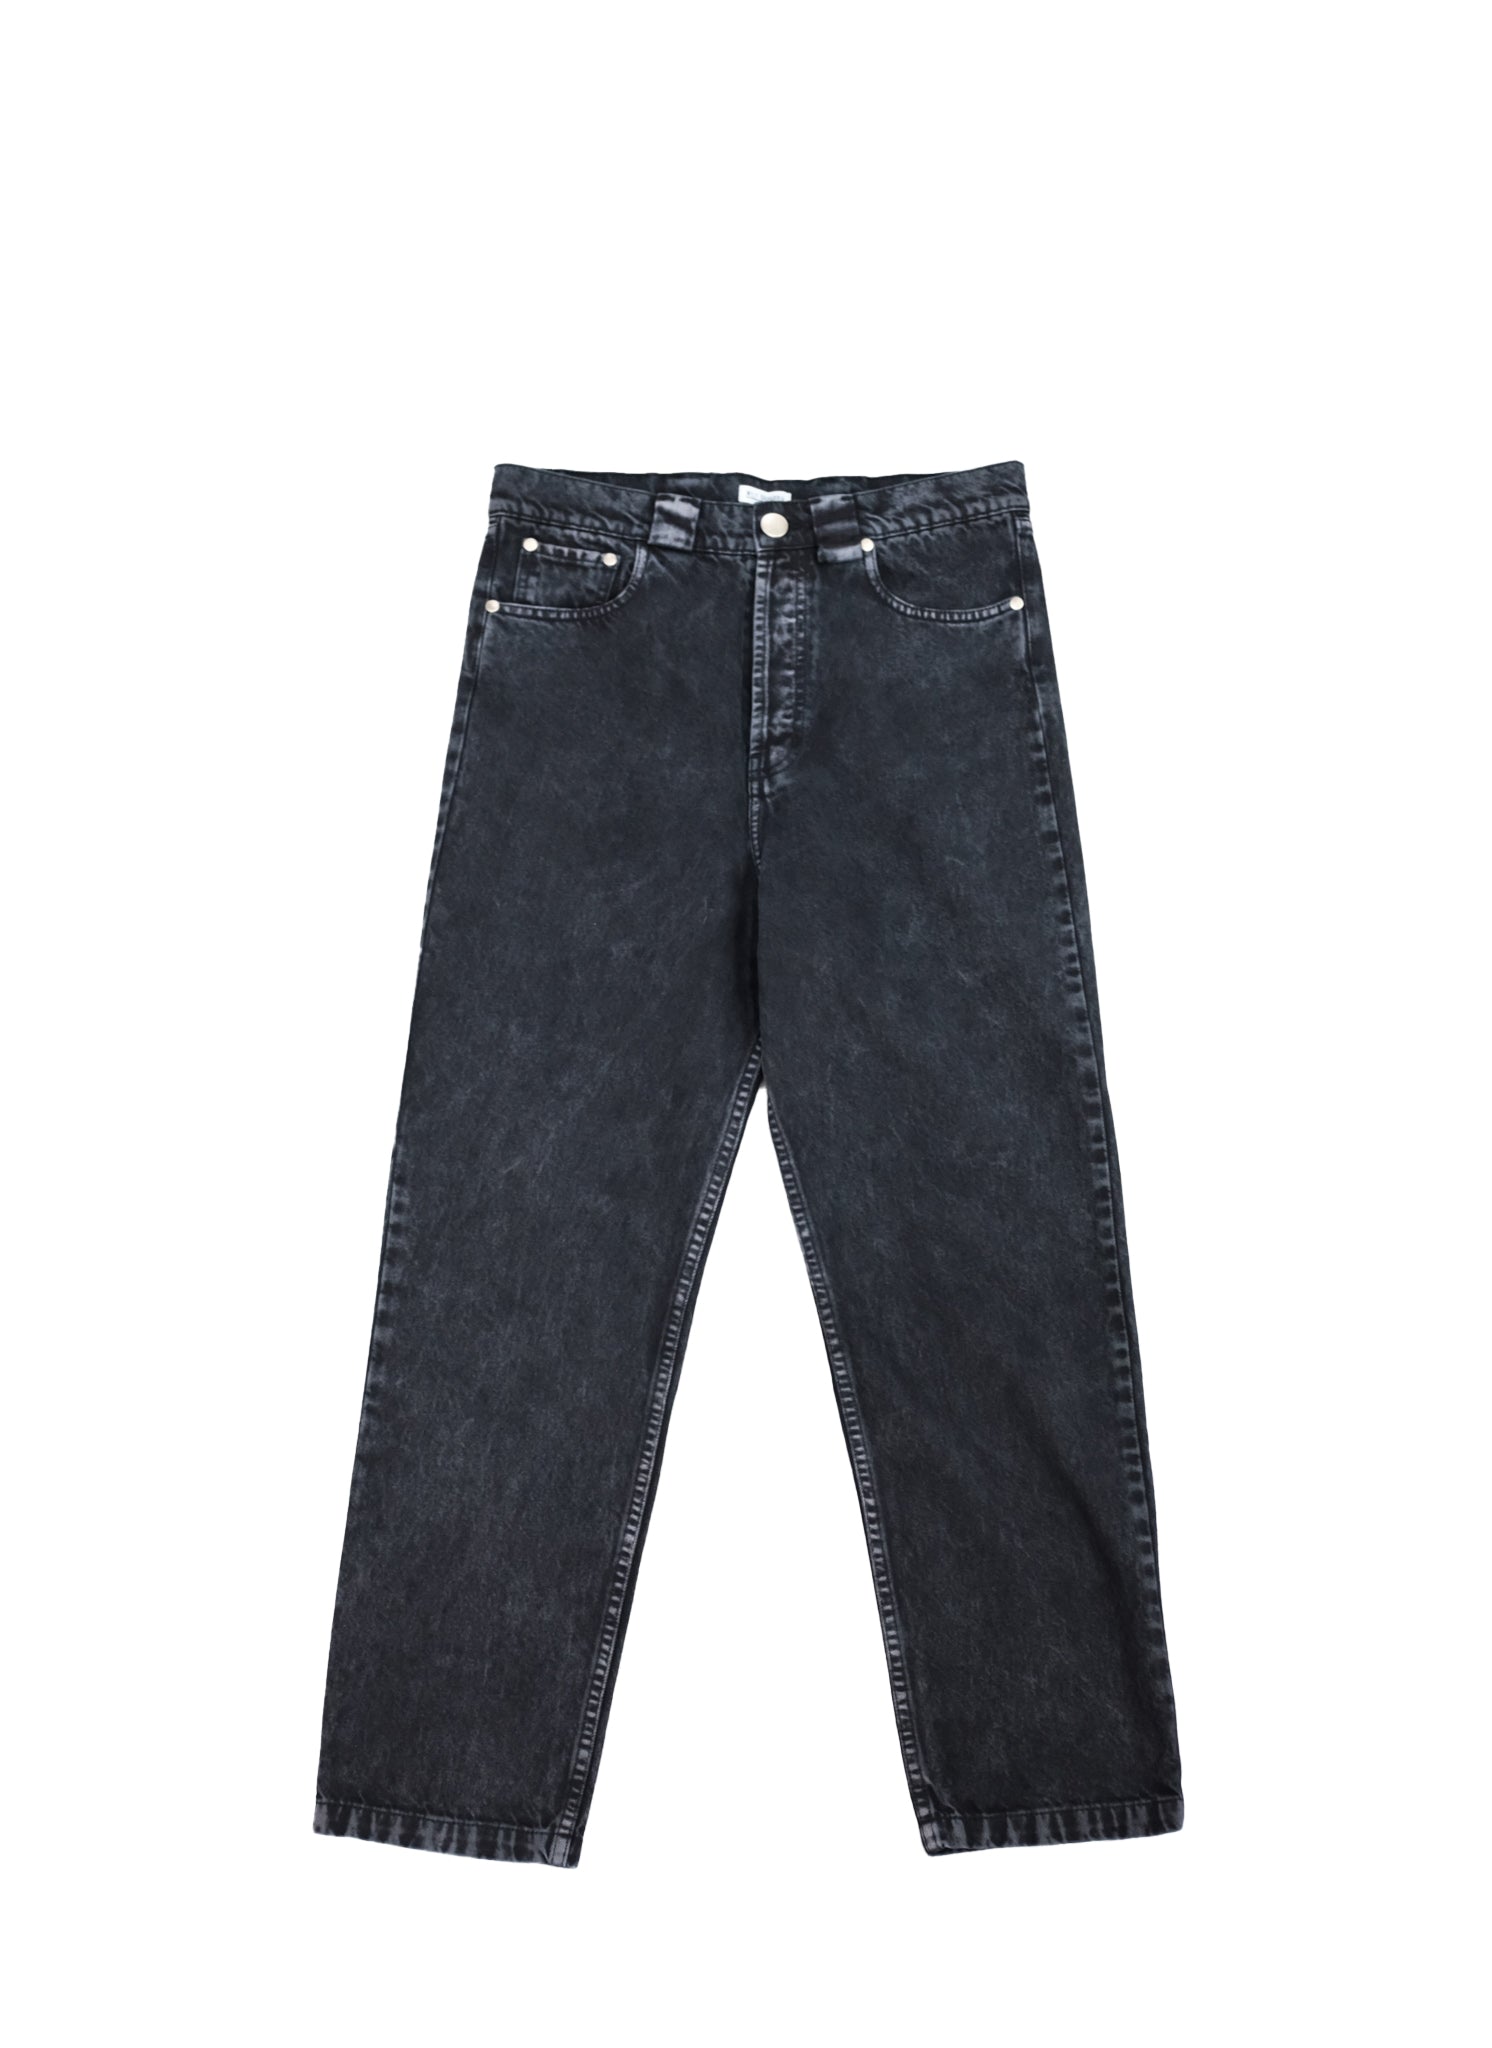 Last One WILLY CHAVARRIA / DIRTY WILLY JEAN WASHED BLACK DENIM